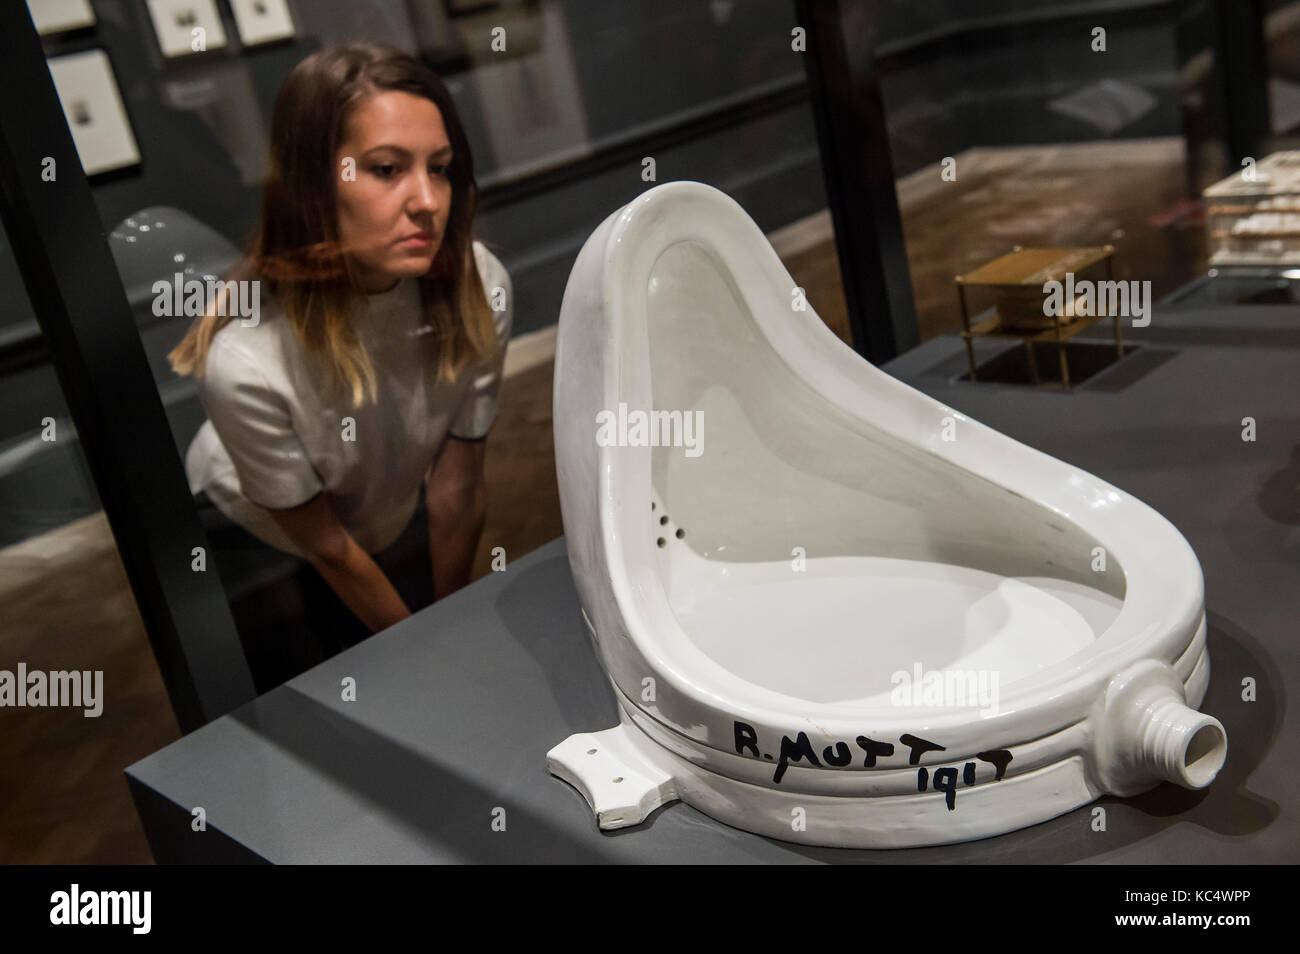 London, UK. 03rd Oct, 2017. Marcel Duchamp’s Fountain, 1917/1964  - Dalí/Duchamp at the Royal Academy of Arts. It is the first exhibition to present the art of these famous artists in dialogue. Marcel Duchamp (1887–1968) and Salvador Dalí (1904–1989) are usually seen as opposites in almost every respect, yet they shared attitudes to art and life that are manifested in their respective oeuvres on many levels. Dalí / Duchamp runs at the Royal Academy of Arts from 7 October 2017 – 3 January 2018. Credit: Guy Bell/Alamy Live News Stock Photo